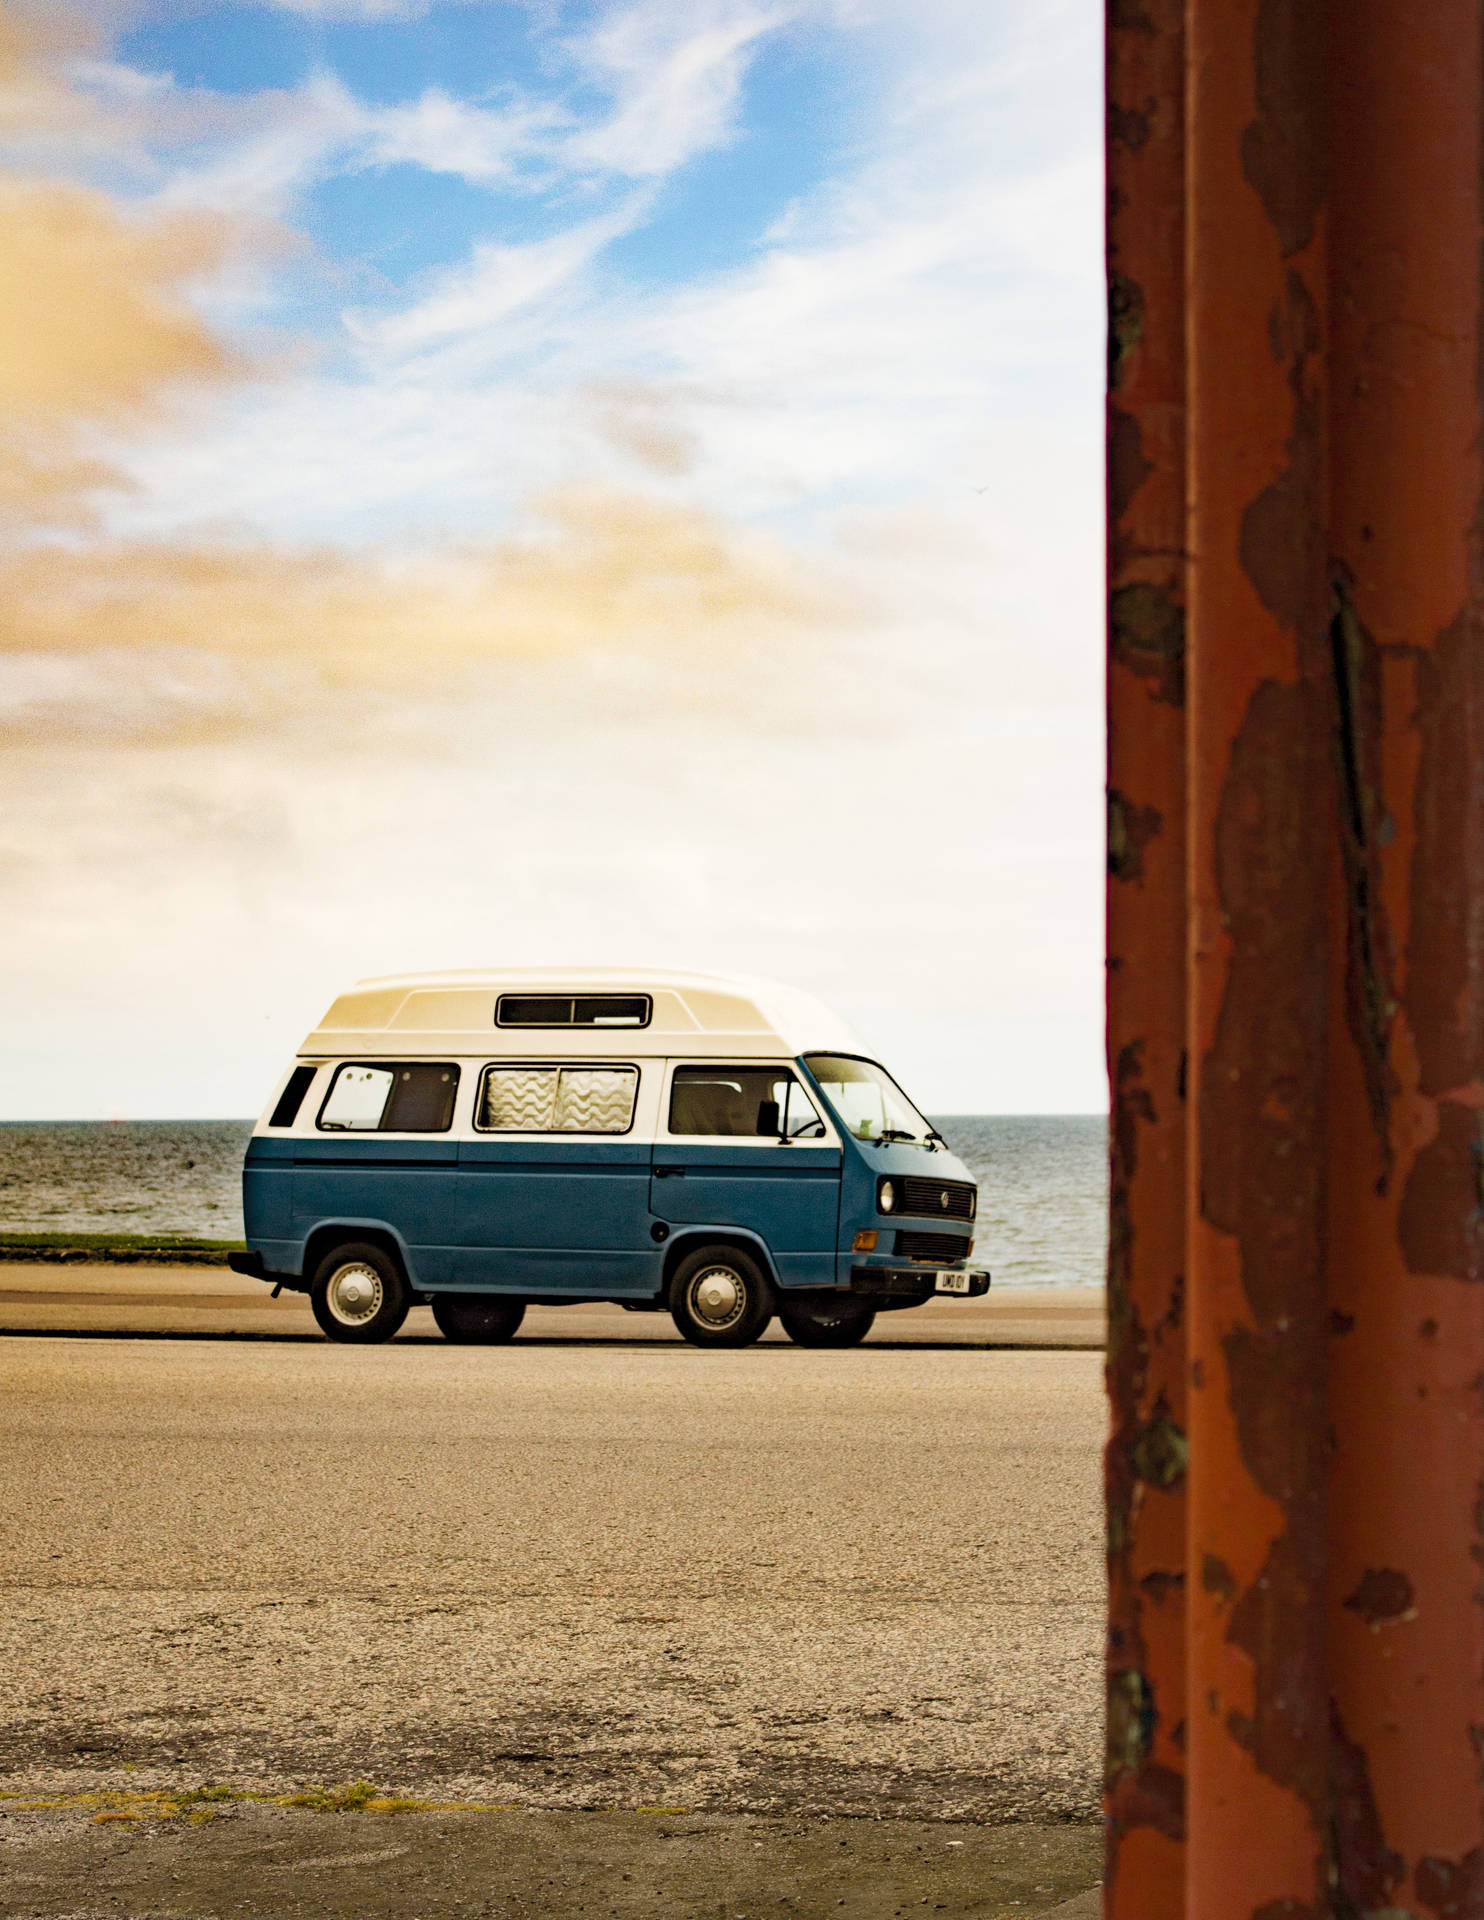 A Nostalgic Ride With A Volkswagen Type 2, Embracing The 70s Retro Aesthetic.